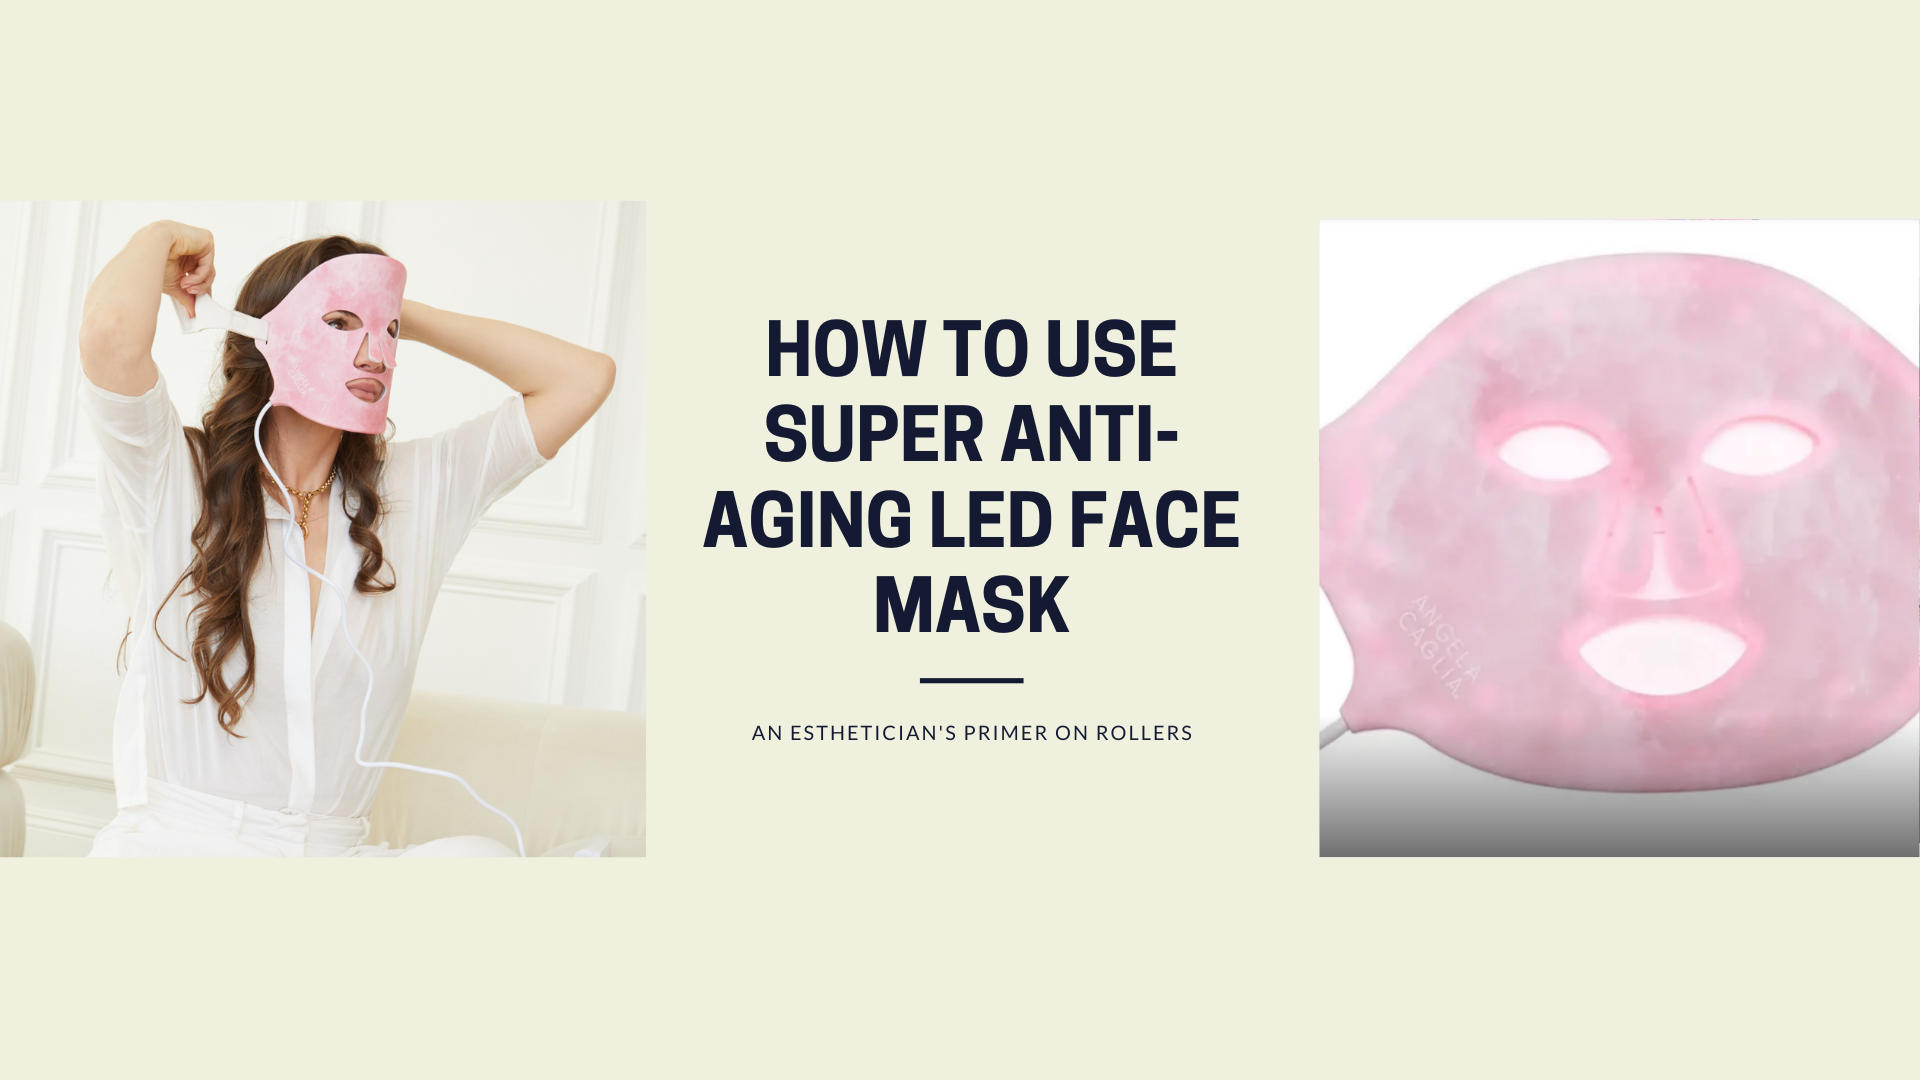 How to use Super Anti-Aging LED Face Mask